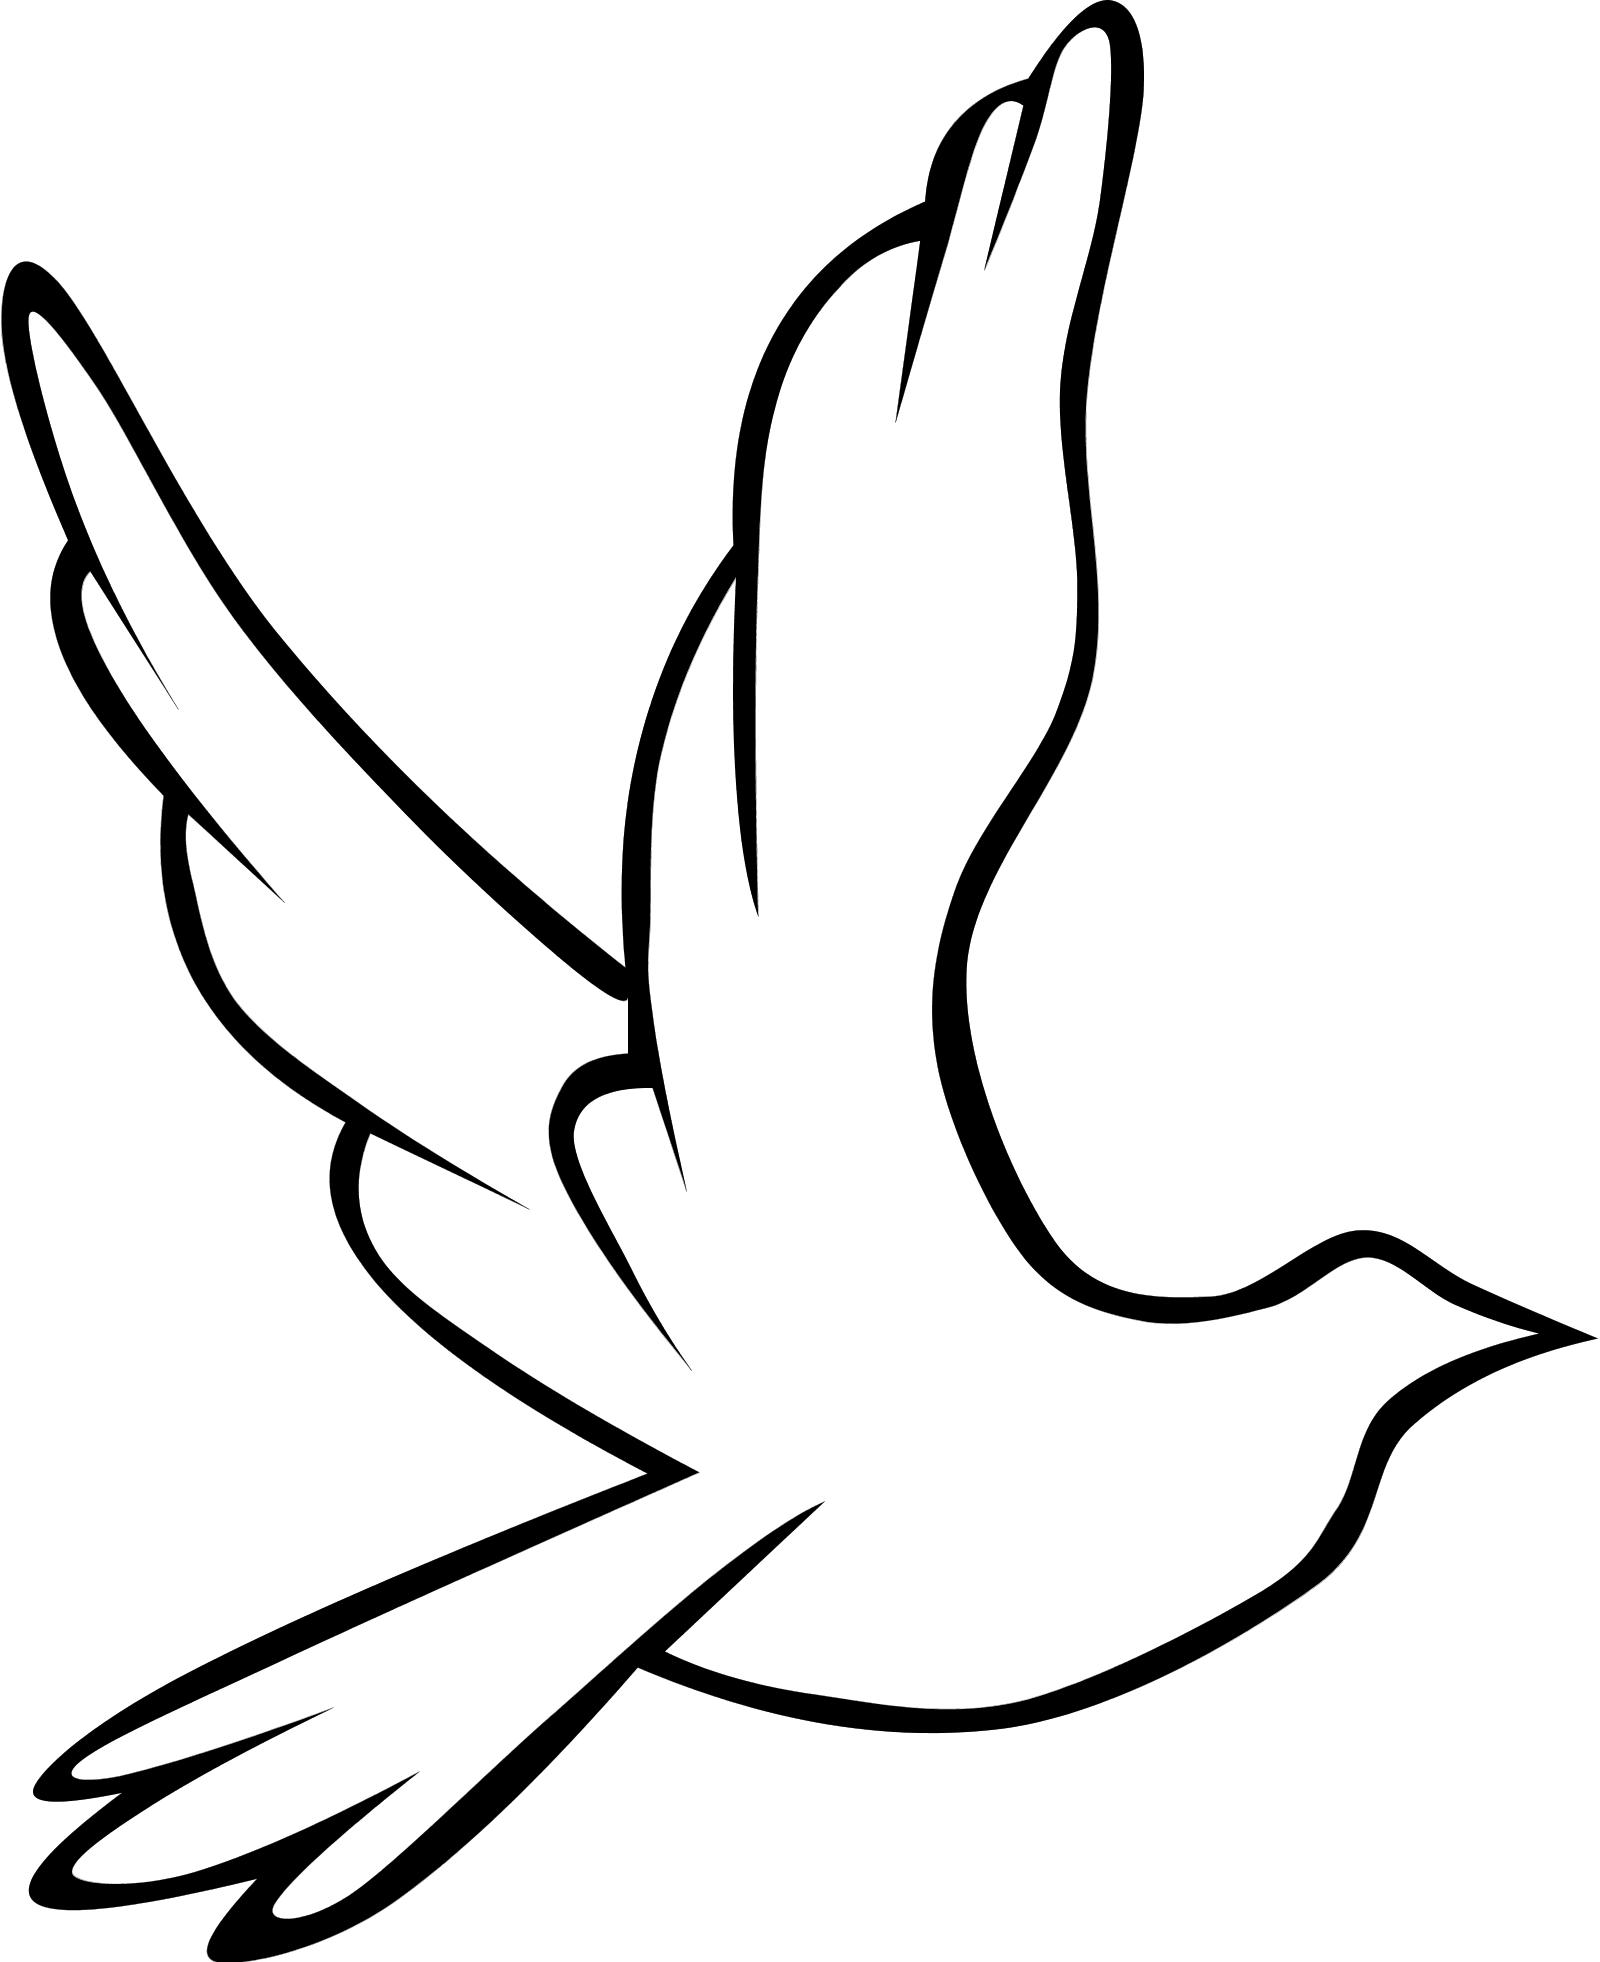 Christian Symbol Of Peace Free Cliparts That You Can Download To You